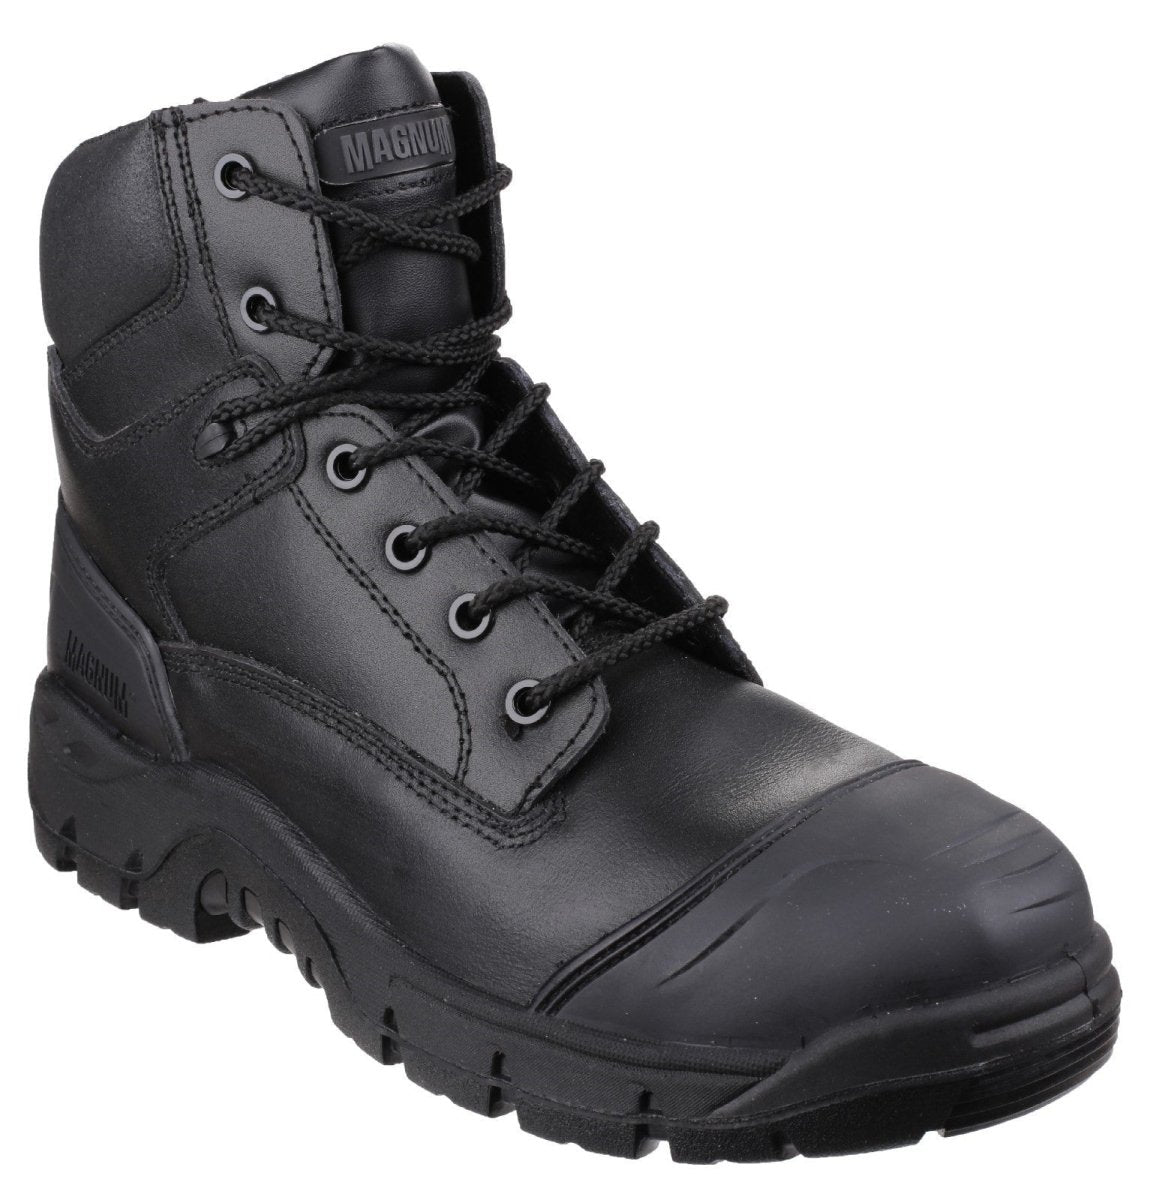 Magnum Roadmaster Safety Boots - Shoe Store Direct